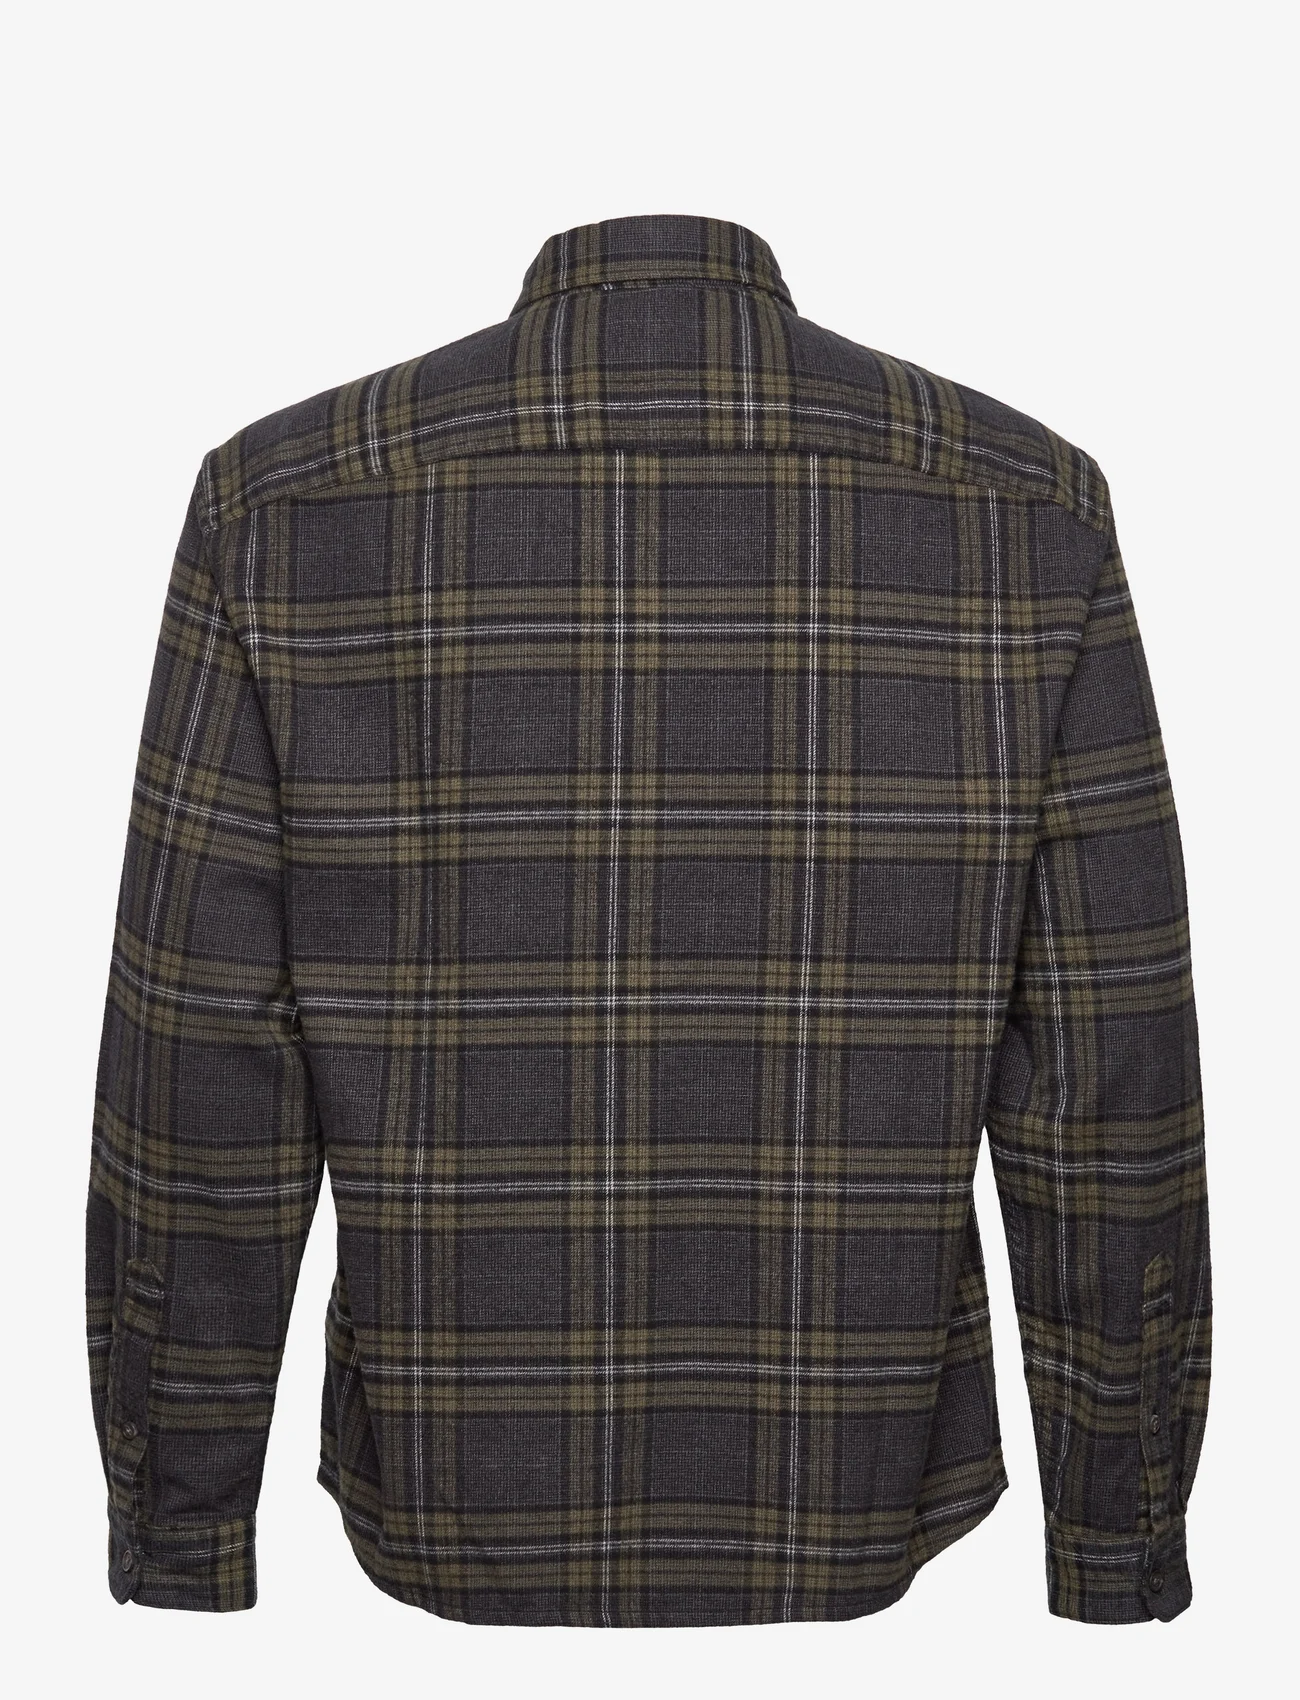 Abercrombie & Fitch - ANF MENS WOVENS - ruutupaidat - blaid plaid - 1